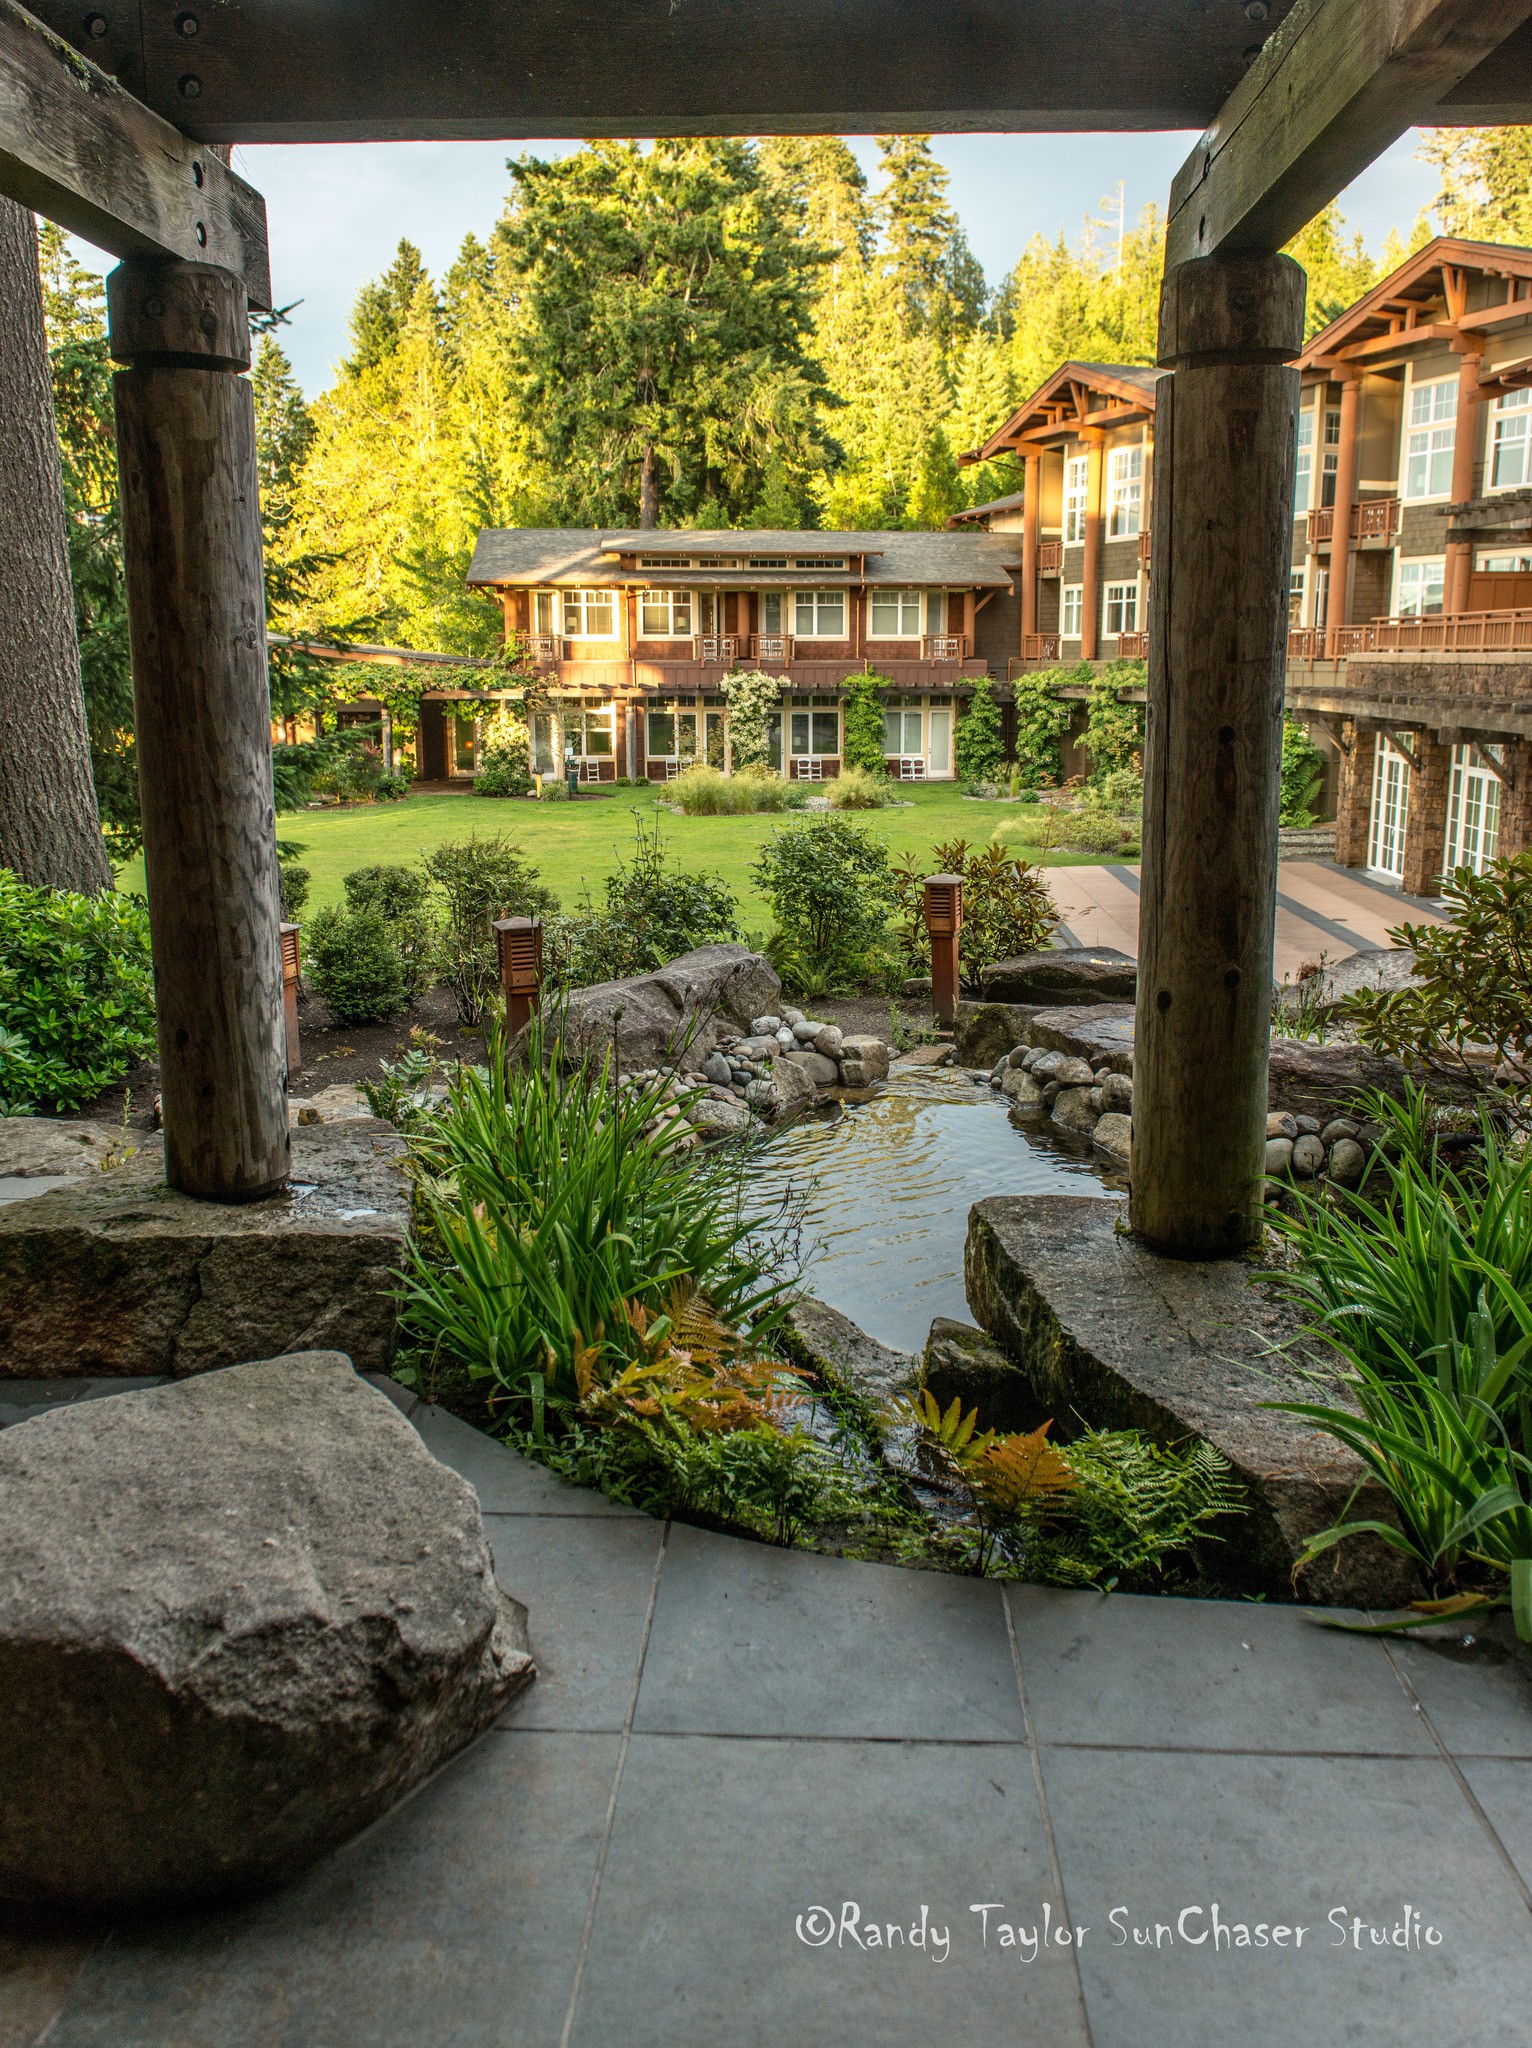 Celebrate 100 Years of the Alderbrook Resort and Spa